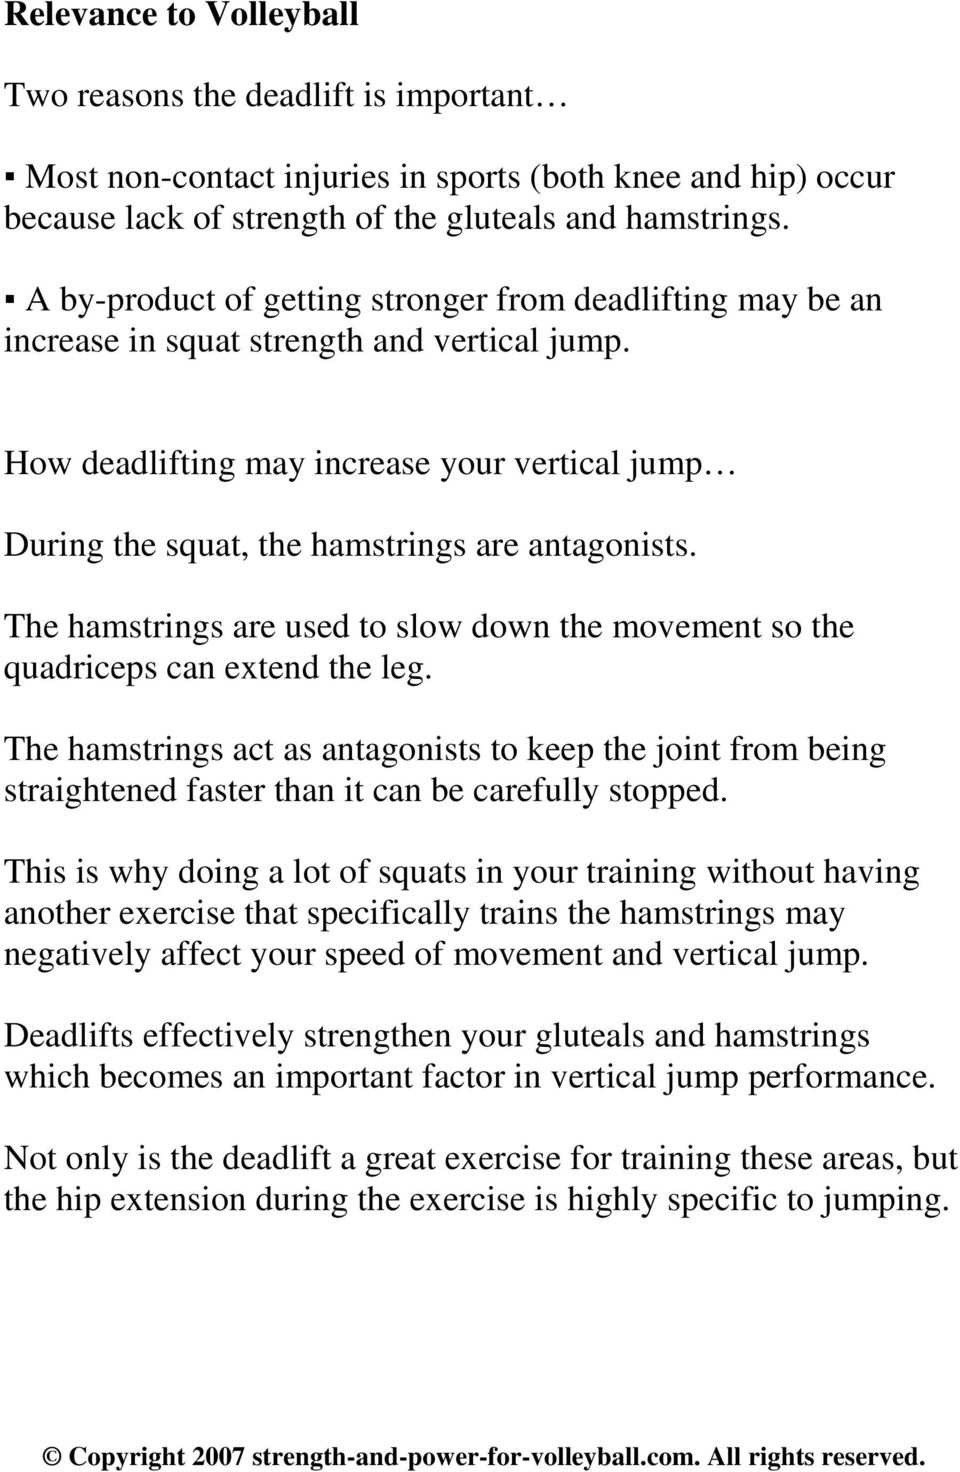 How deadlifting may increase your vertical jump During the squat, the hamstrings are antagonists. The hamstrings are used to slow down the movement so the quadriceps can extend the leg.